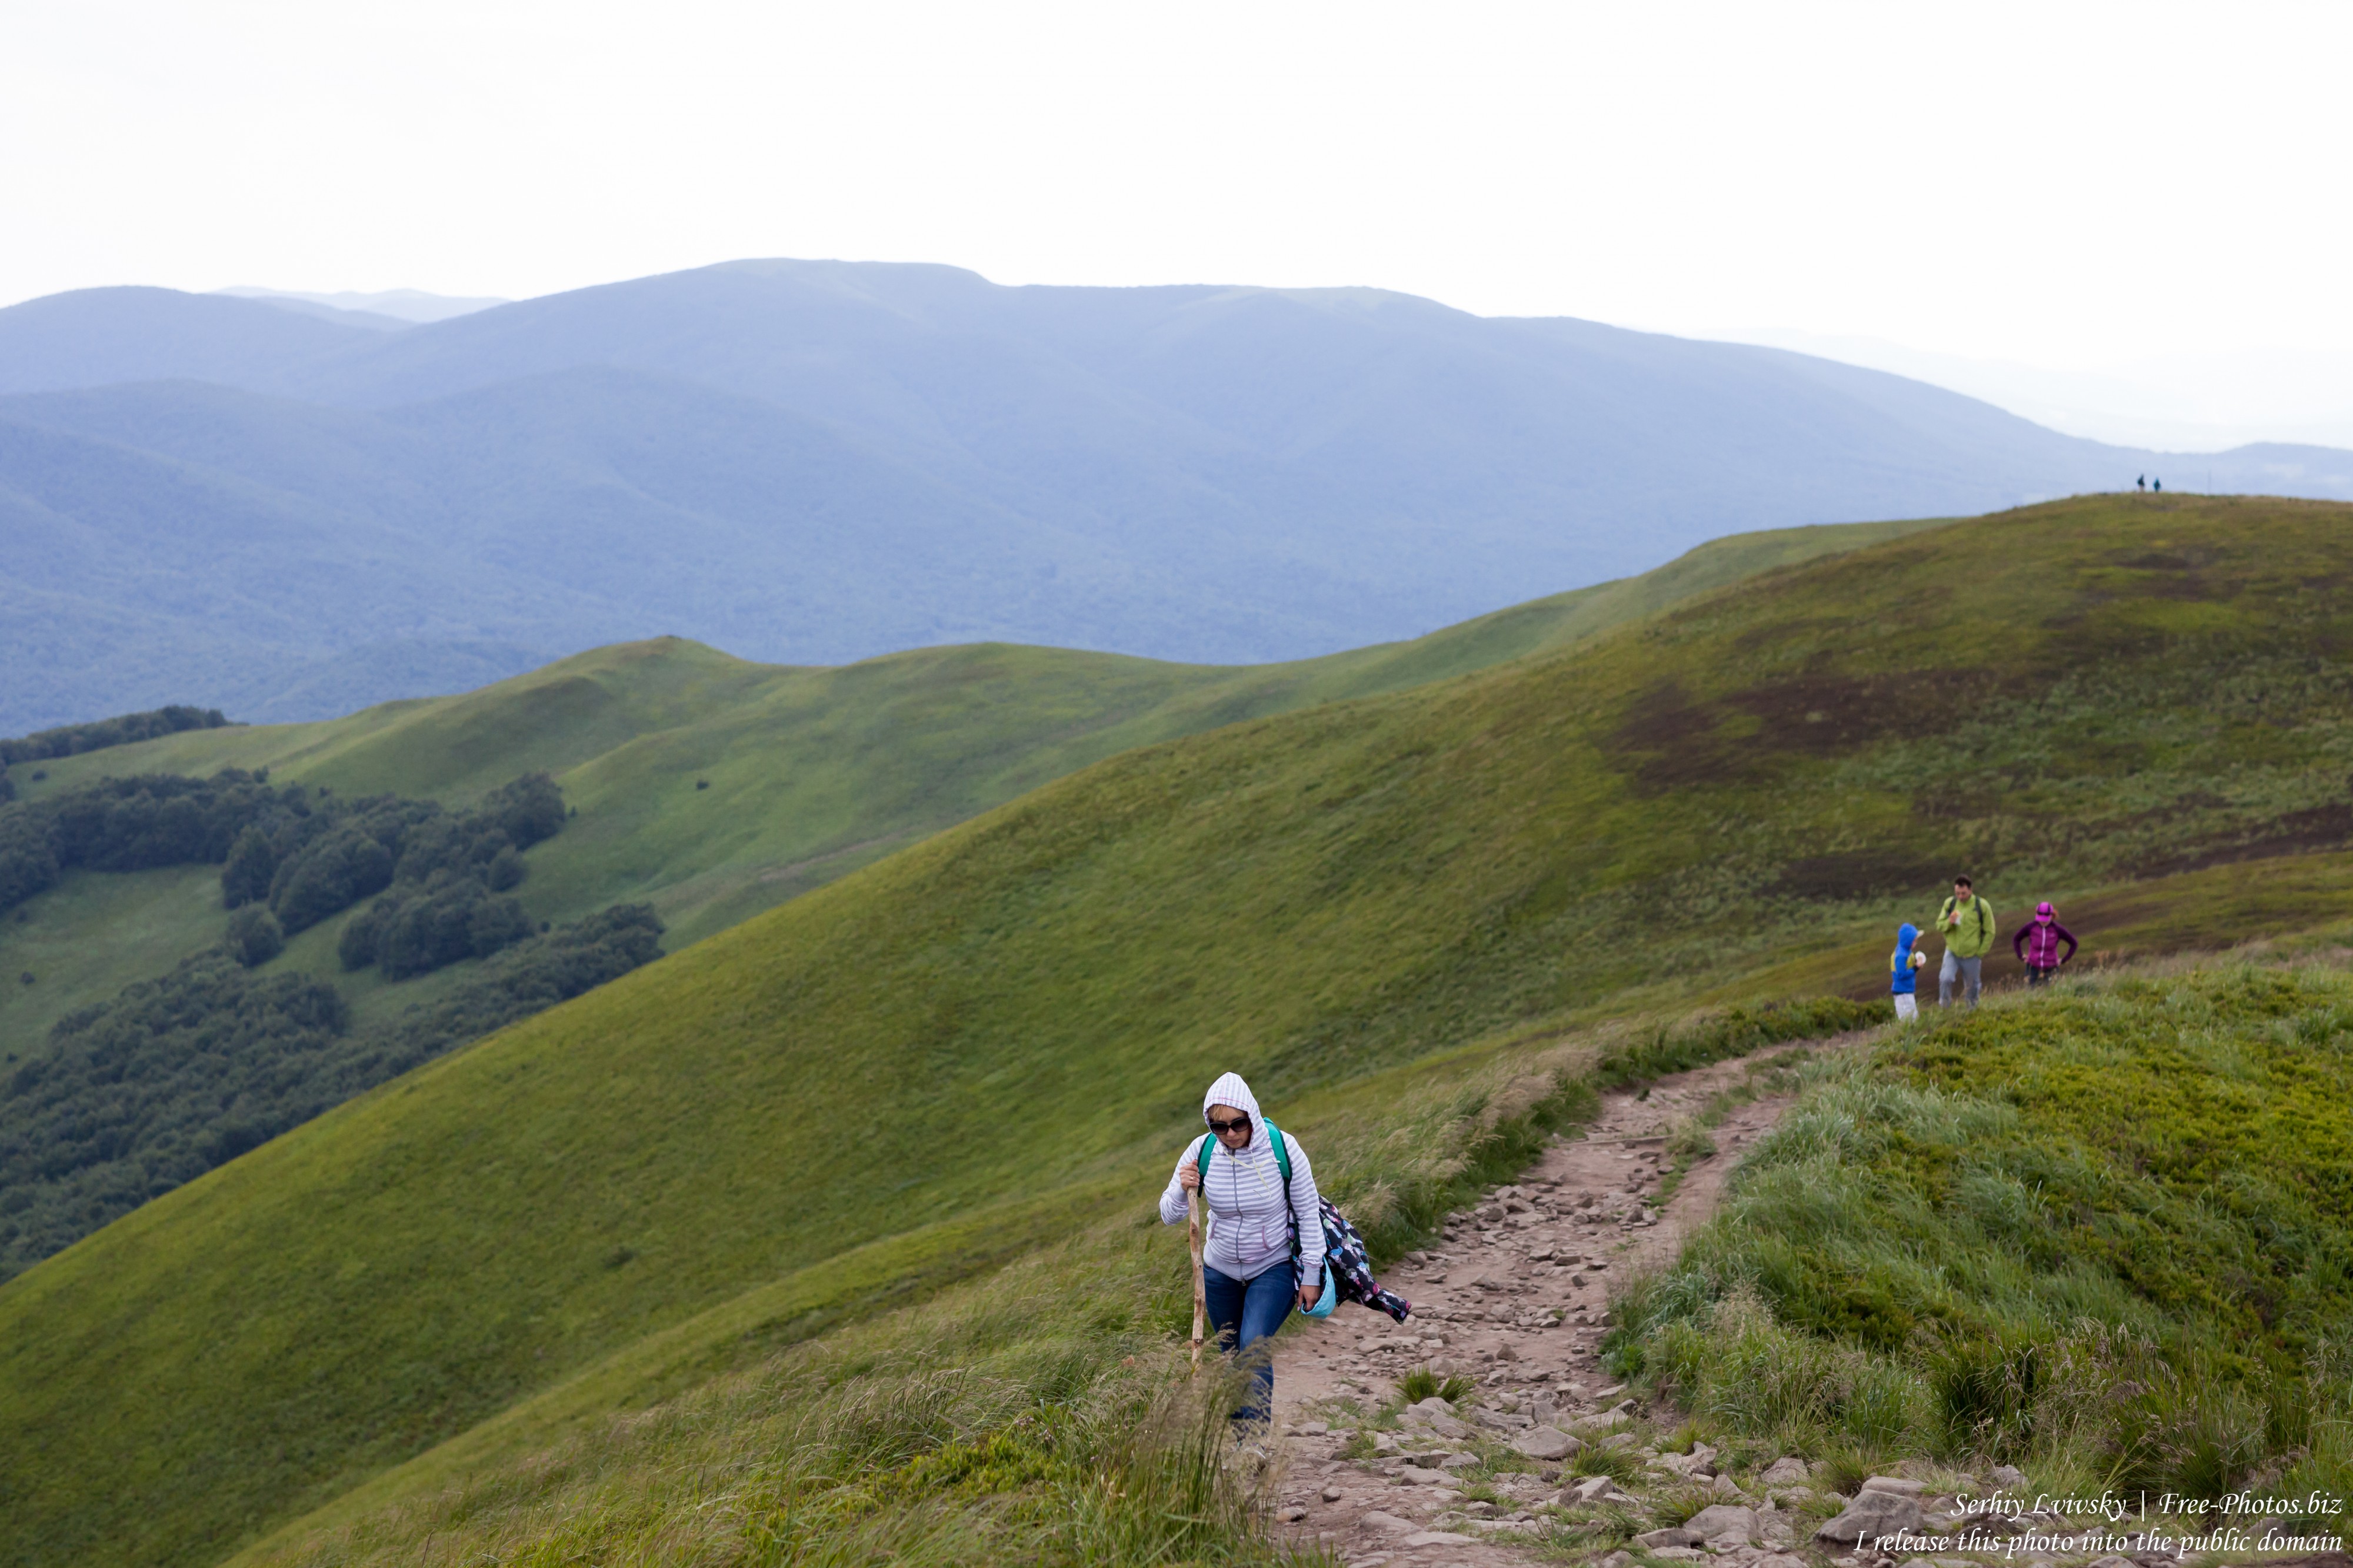 Bieszczady mountains, Poland, photographed in July 2017 by Serhiy Lvivsky, picture 1